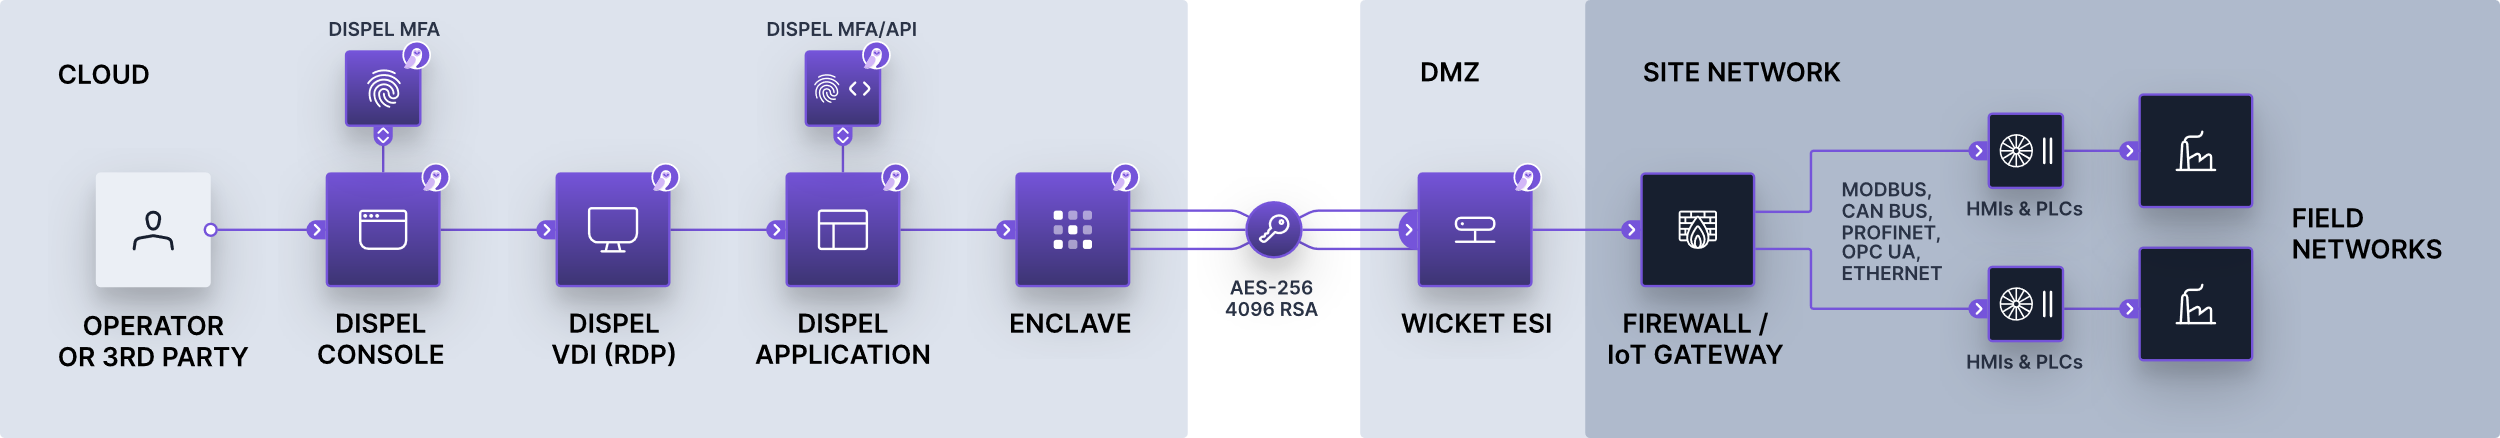 High-level diagram of how Dispel is implemented, which includes two realms: the cloud and the DMZ. The cloud is where the Dispel console, VDI, application, and the enclave reside. The DMZ is where the Wicket ESI resides along with the ICS environment. These two realms communicate through a secure, encrypted channel.